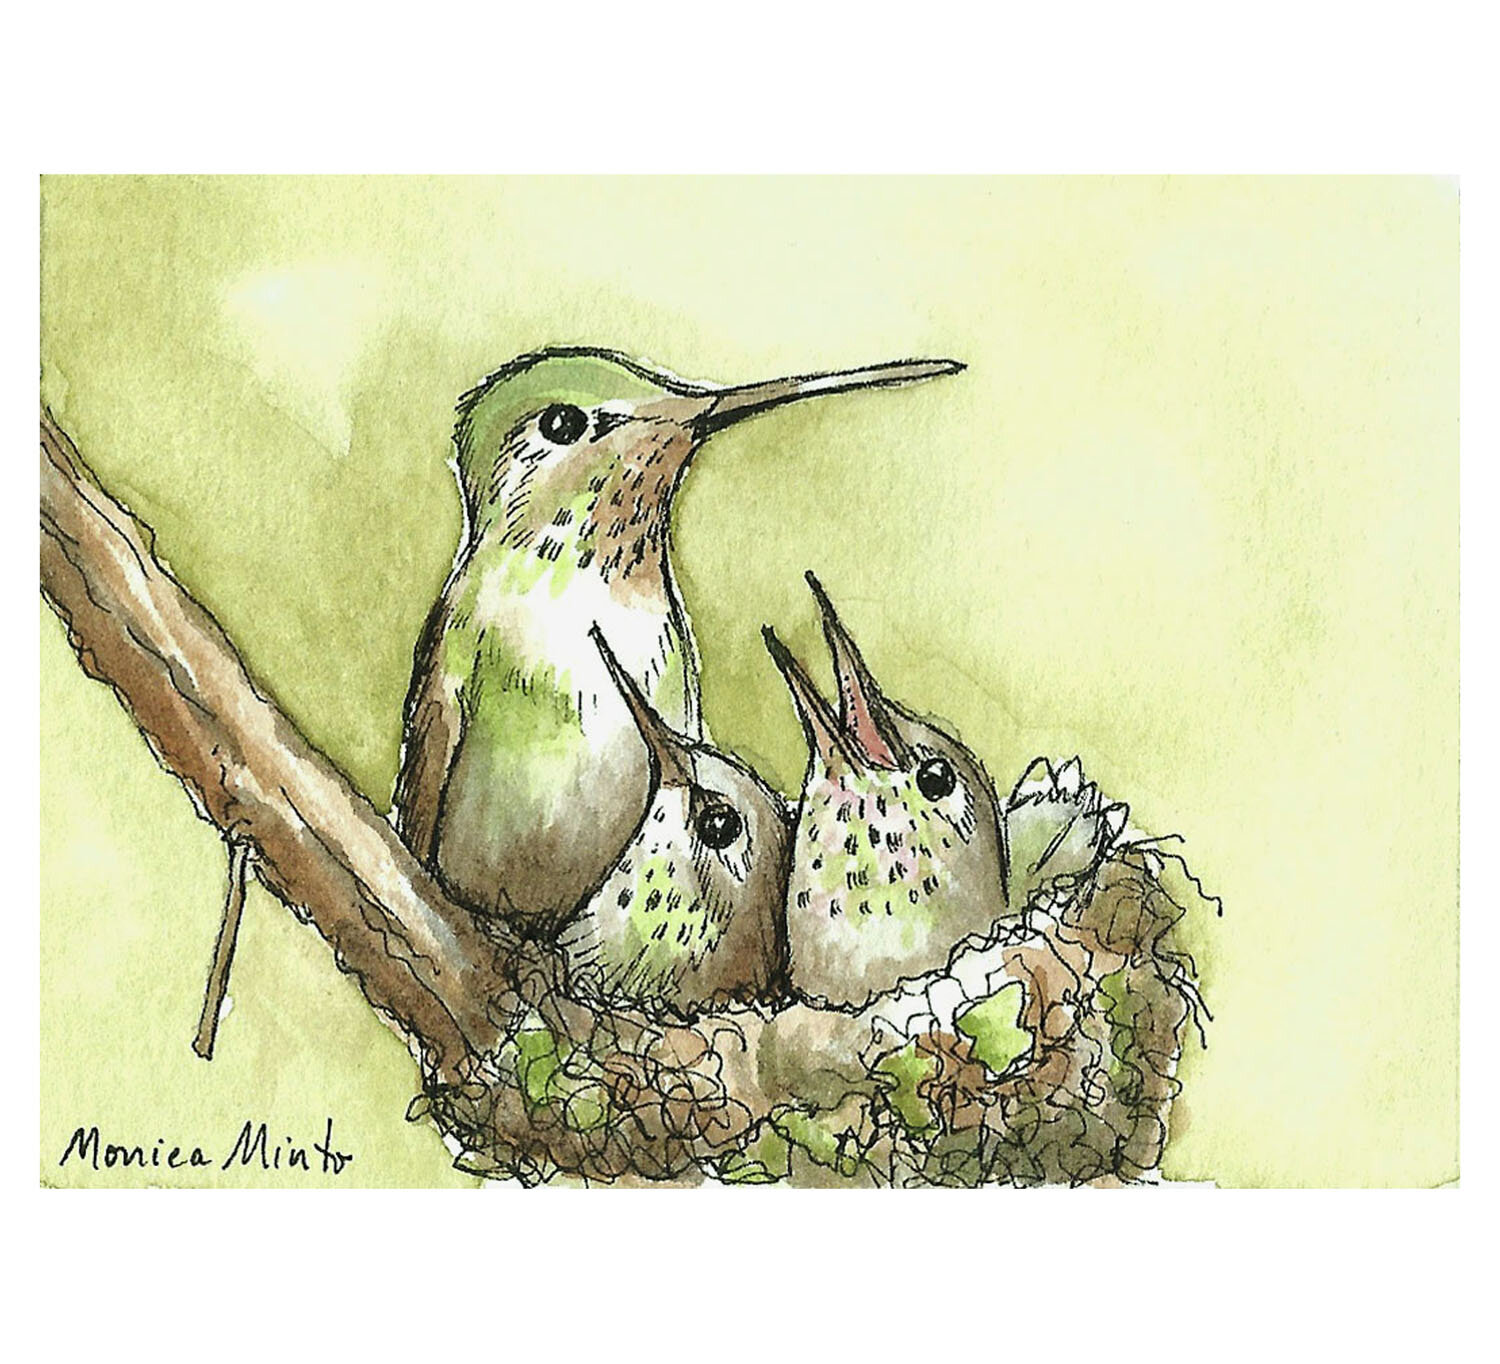 hummingbird print of Original Pen and Ink by Monica Minto ACEO Limited Edition 